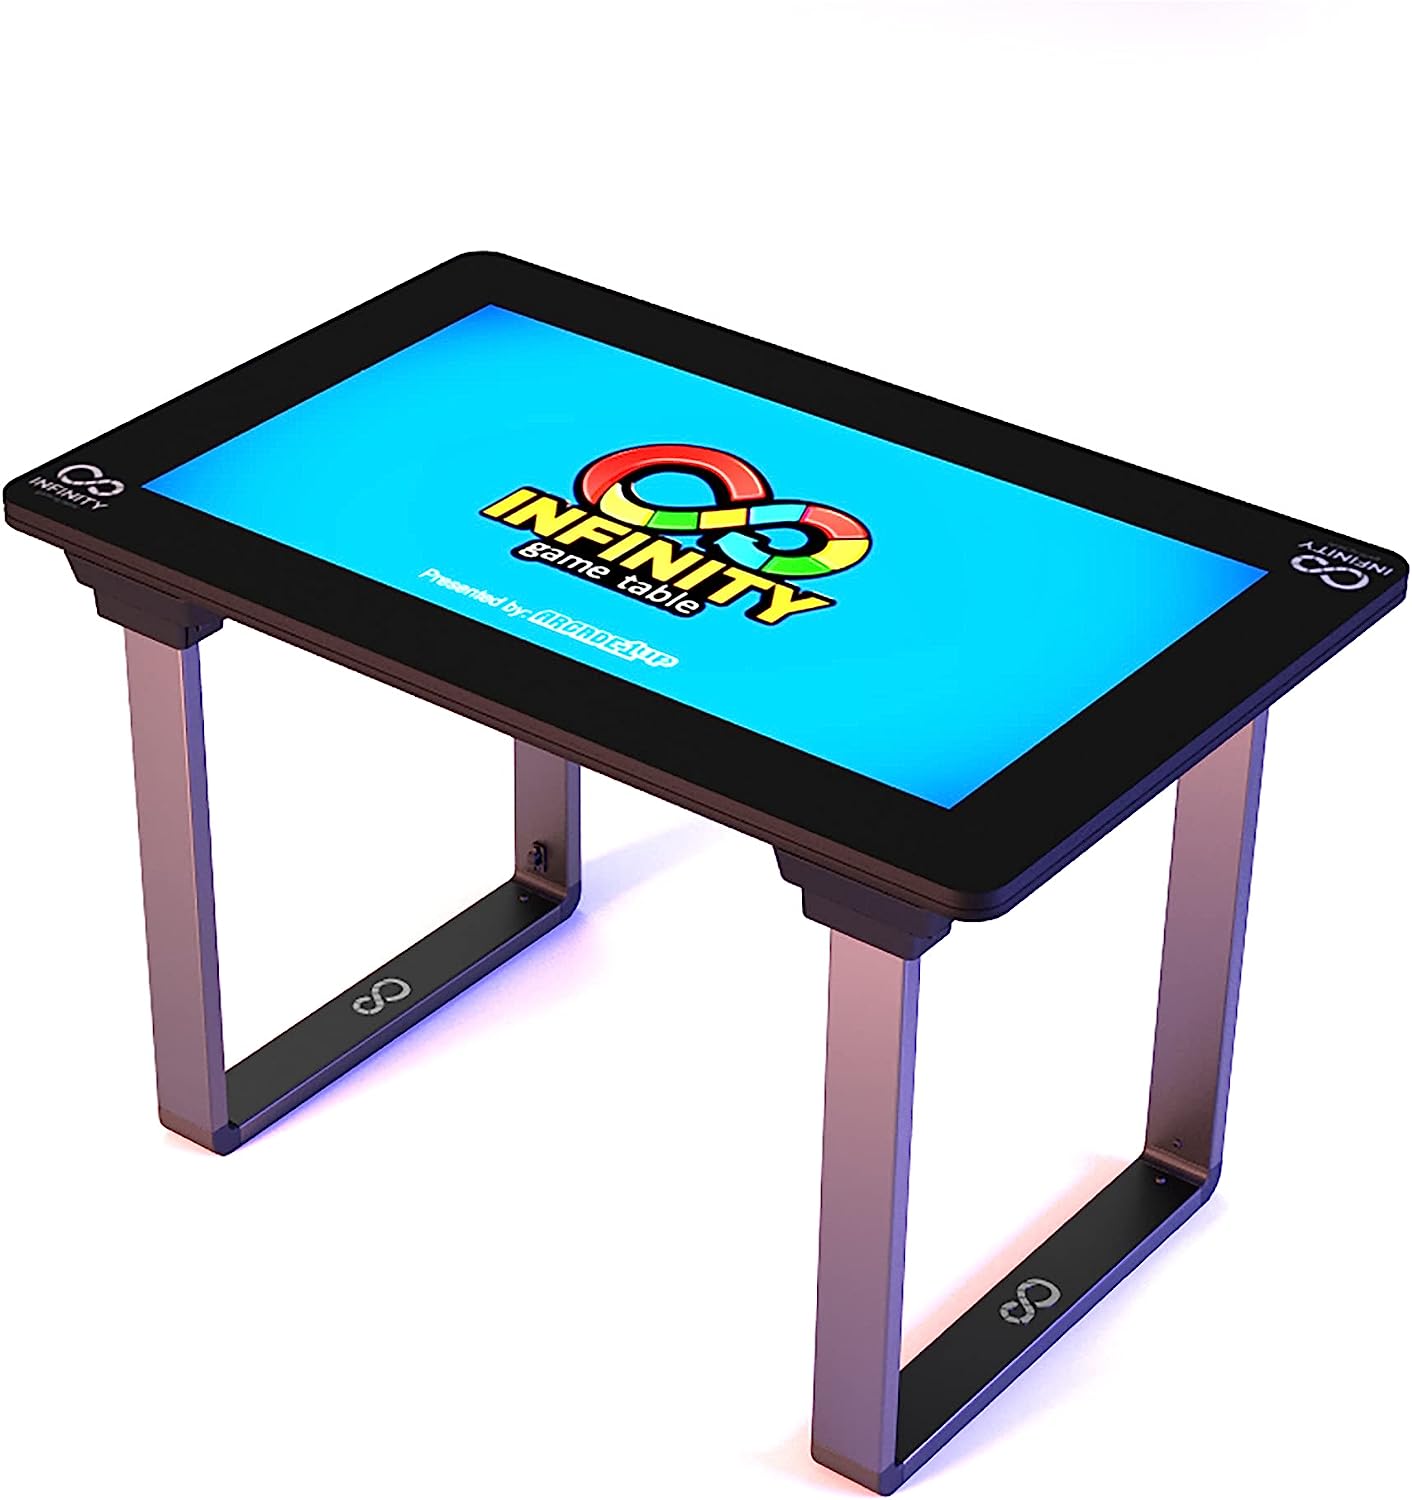 Arcade1Up Infinity Game Table - Black